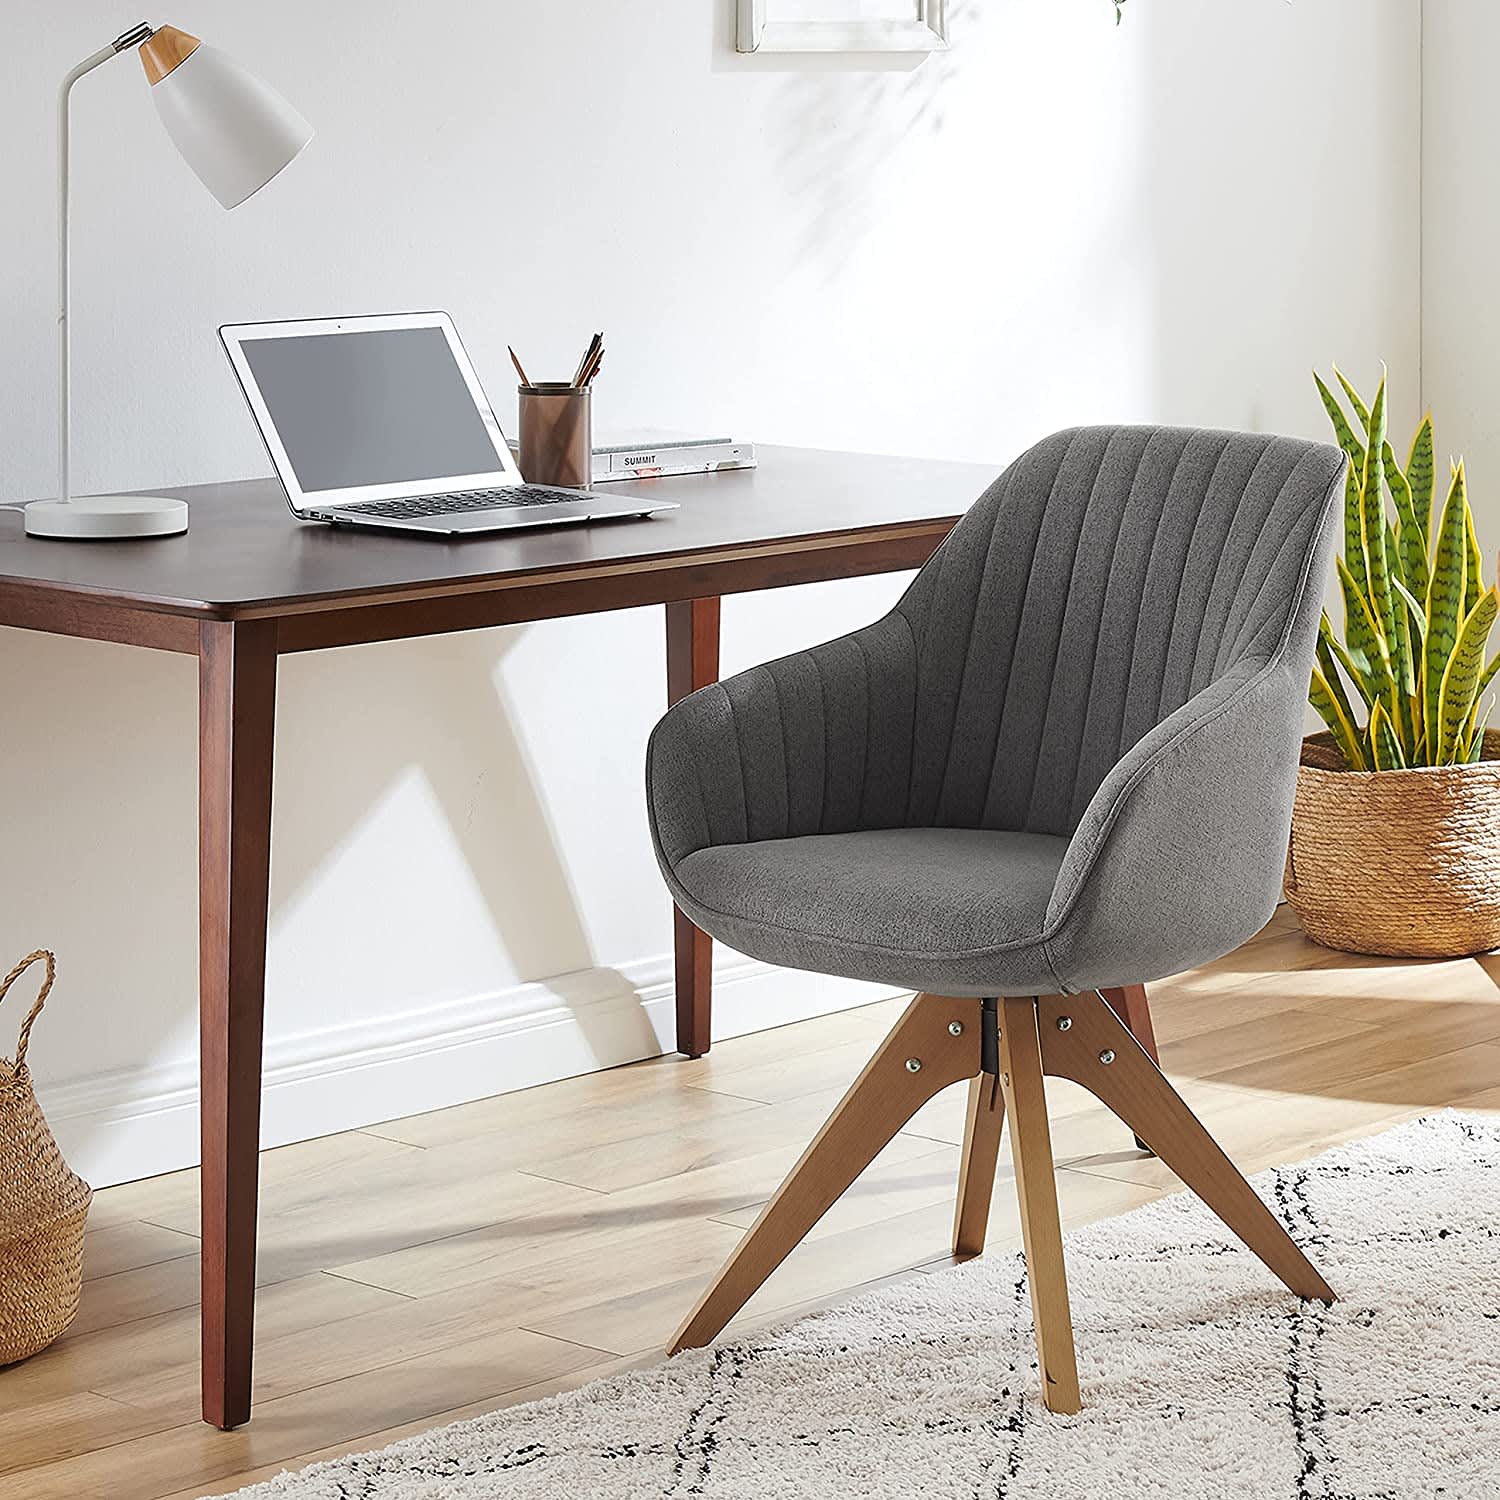 Do Beautiful Yet Comfortable Office Chairs Exist?? Jess Takes You